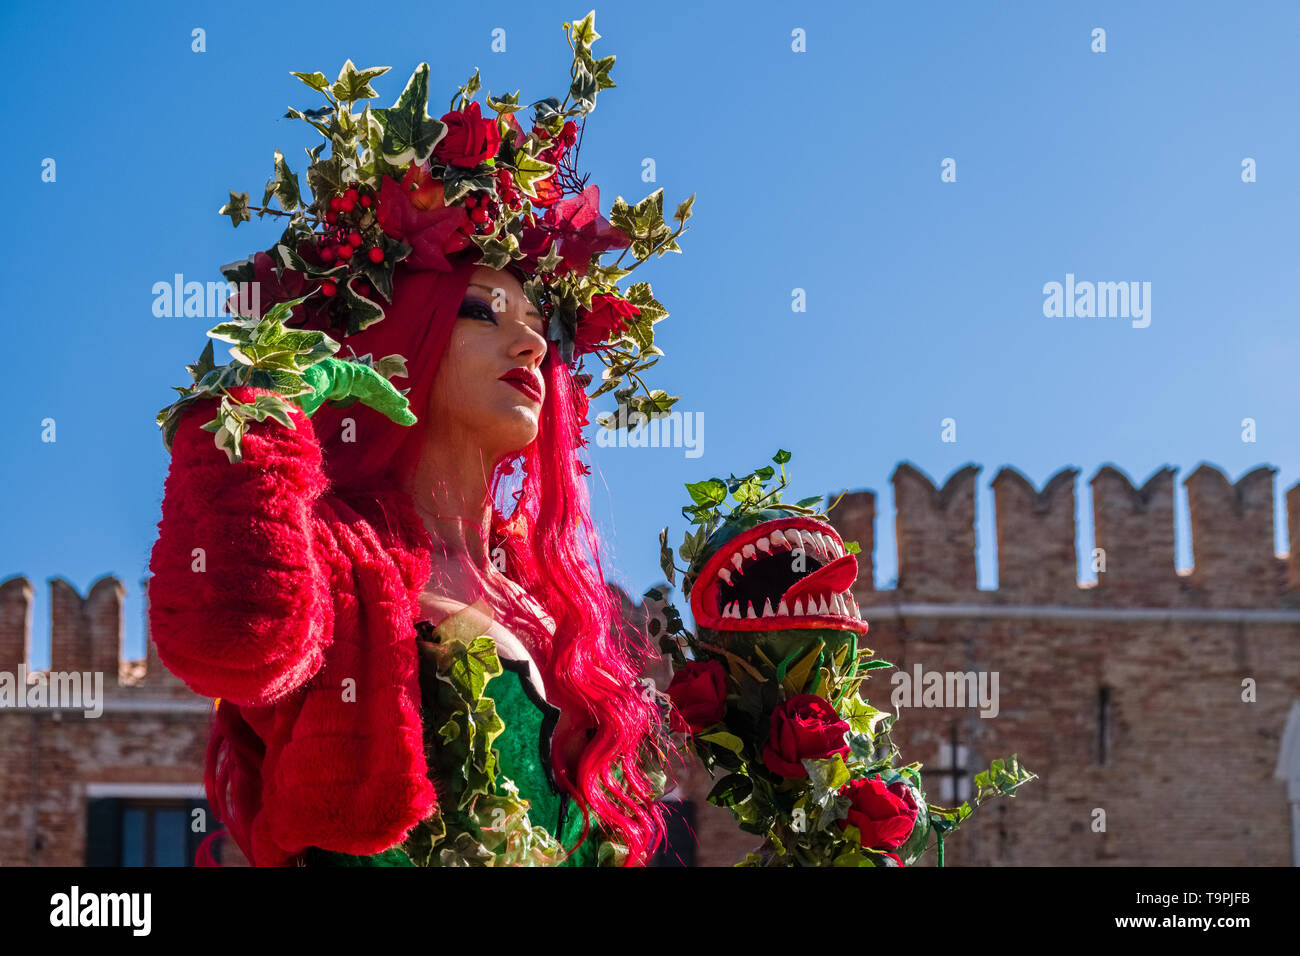 Portrait of a feminin masked person in a beautiful creative costume, posing at the buildings of Arsenale, celebrating the Venetian Carnival Stock Photo